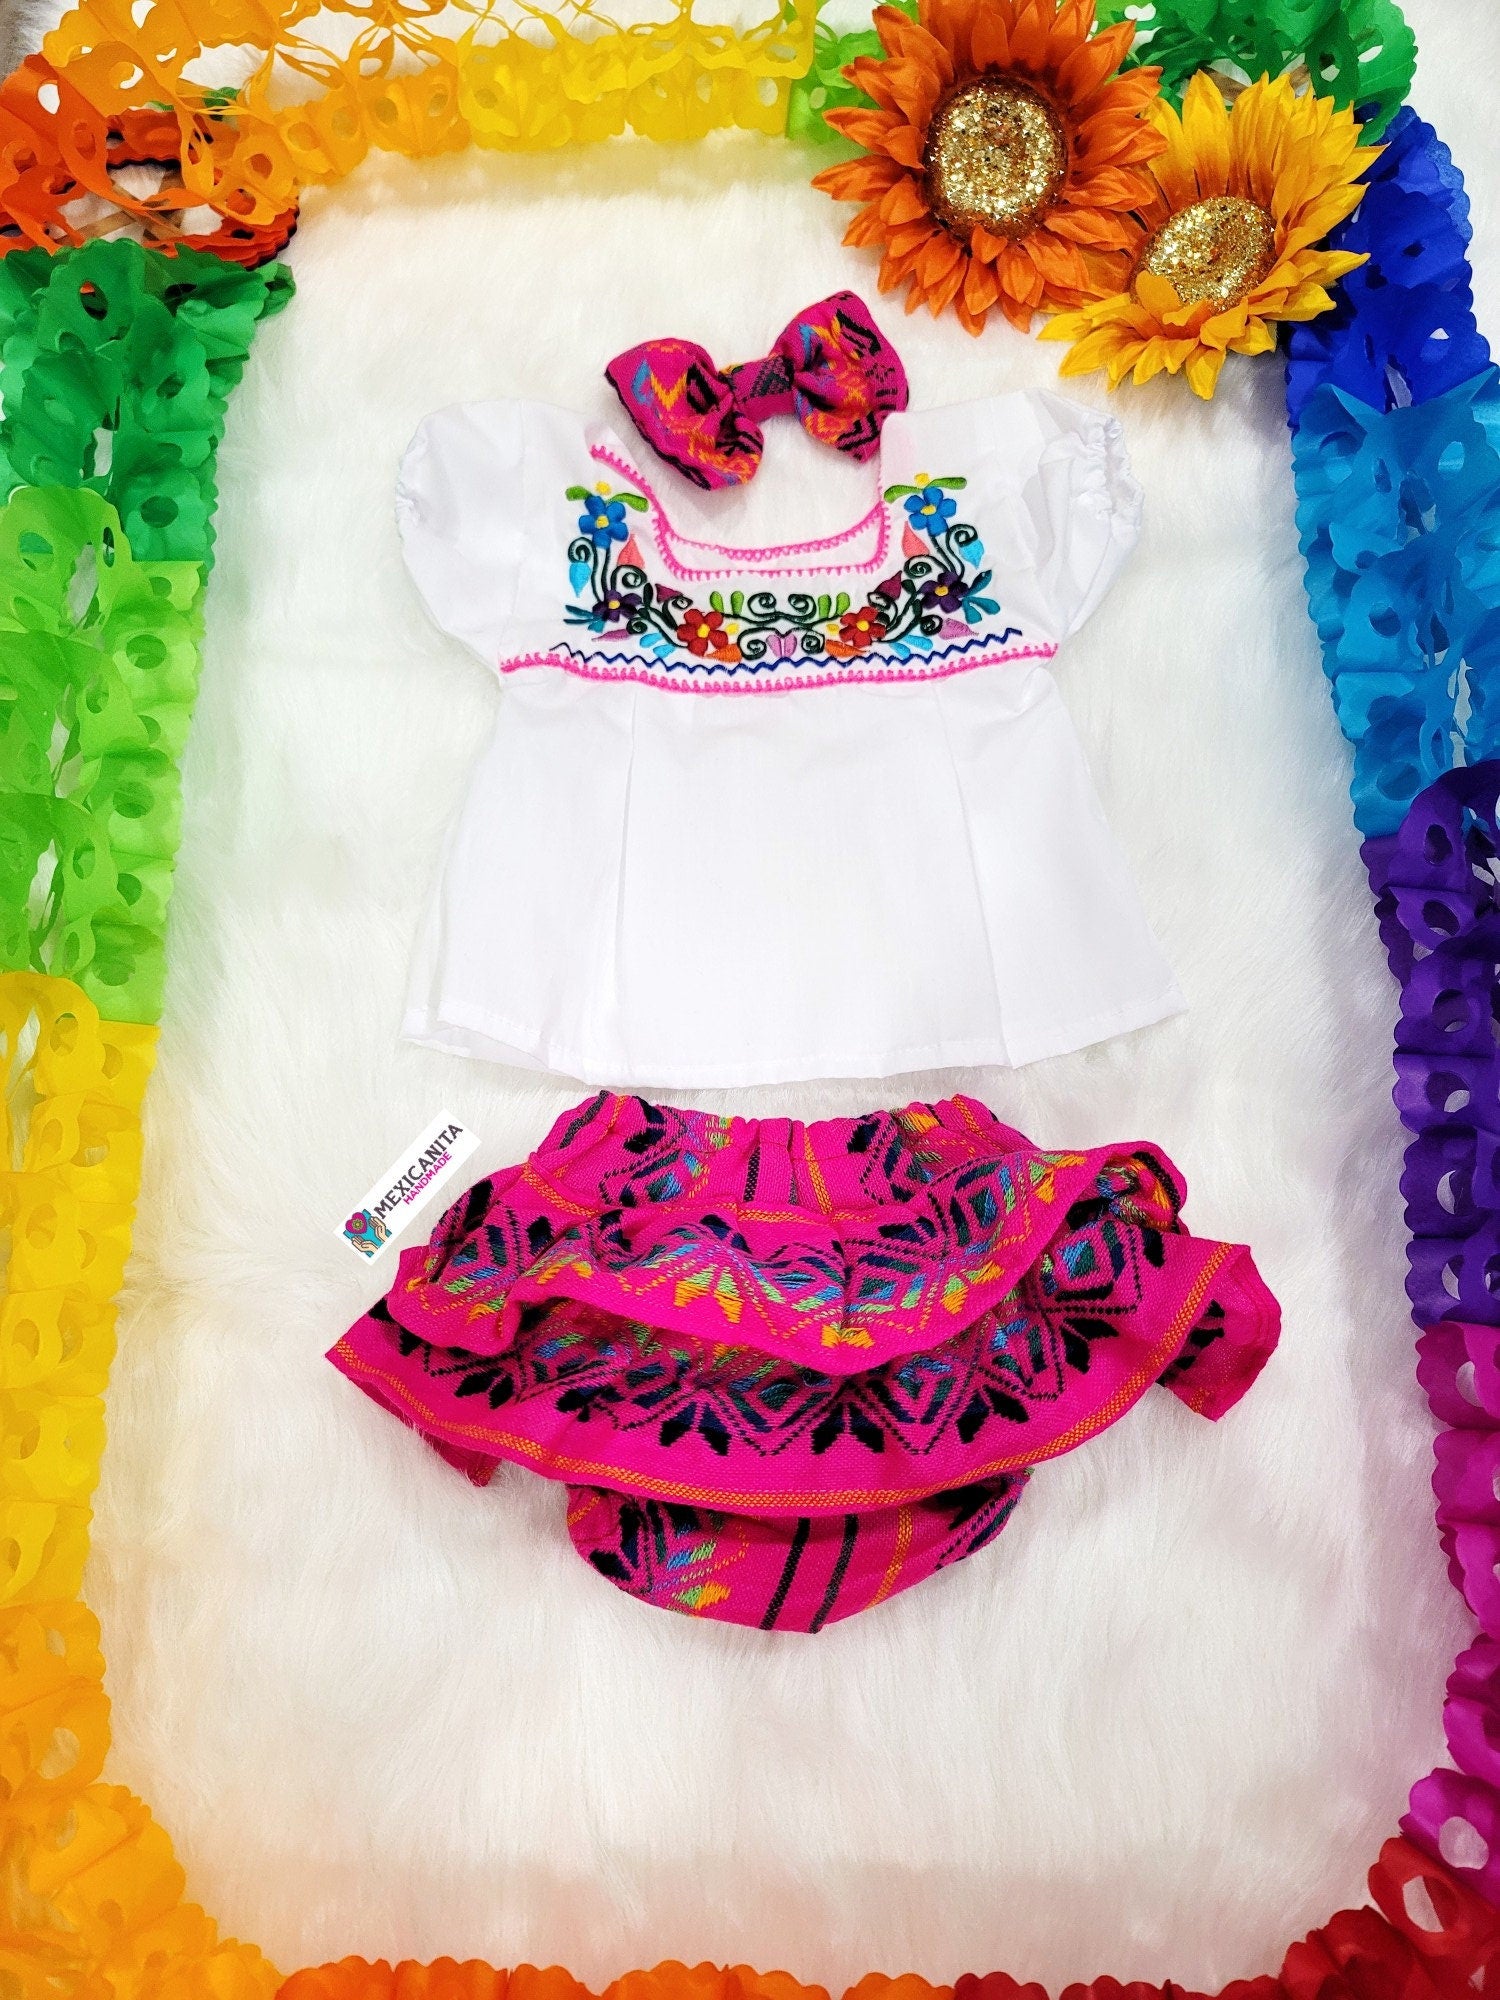 Baby mexican outfit//Taco-bout party outfit//Fiesta outfit//Mexican bloomers/Serape//taco twosday party//ruffles//baby mexican set outfit//